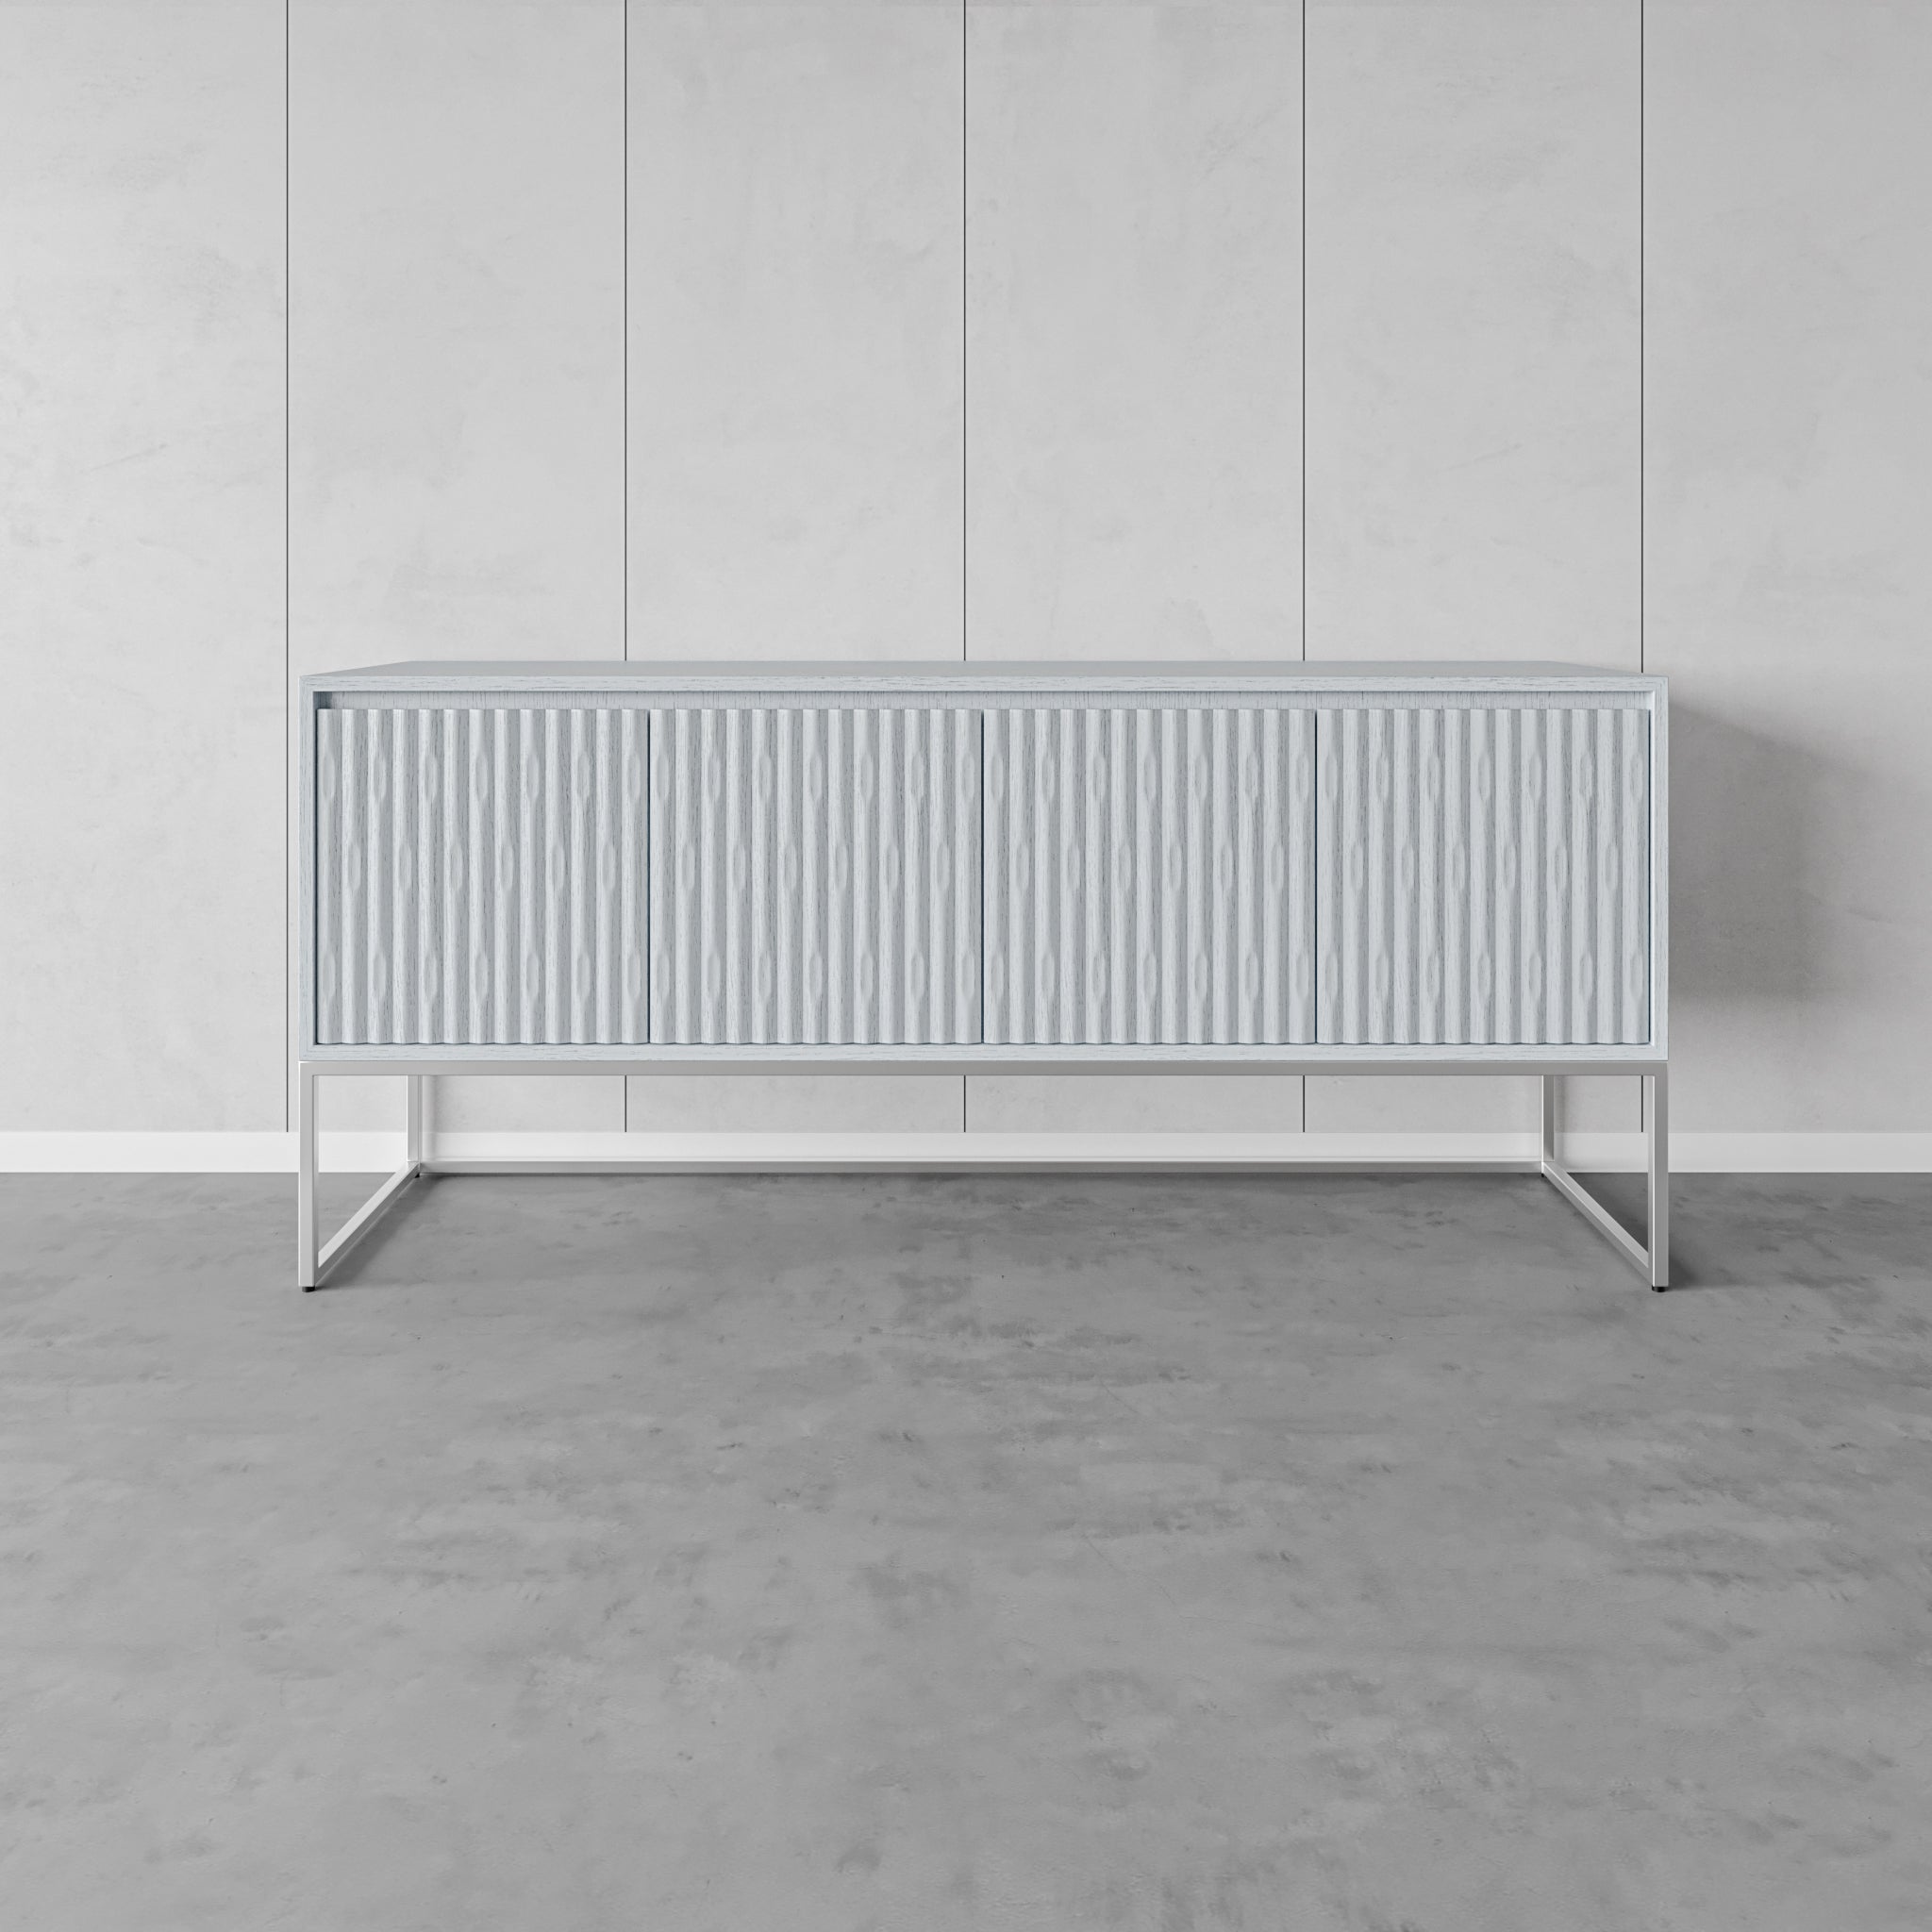 INSCULPT SILVER WHITE SIDEBOARD